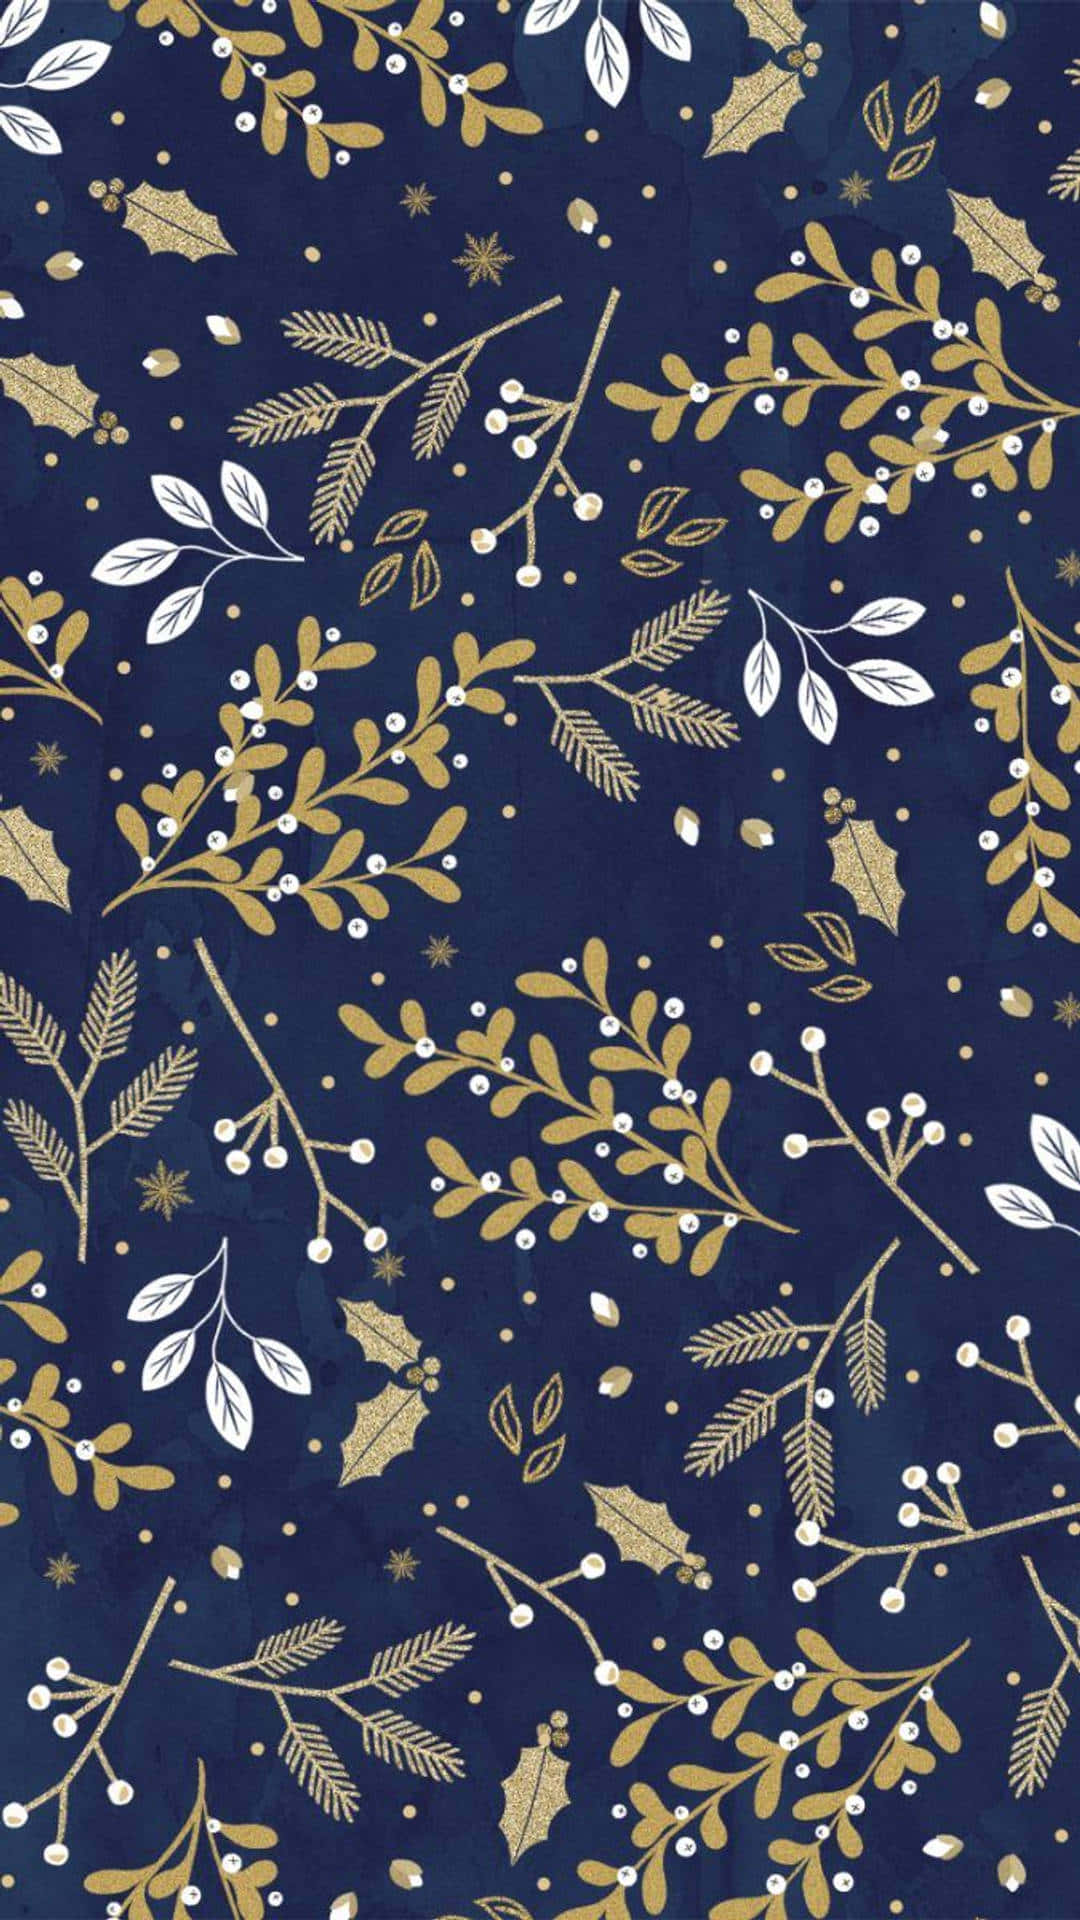 A Blue And Gold Christmas Fabric With Leaves And Branches Wallpaper